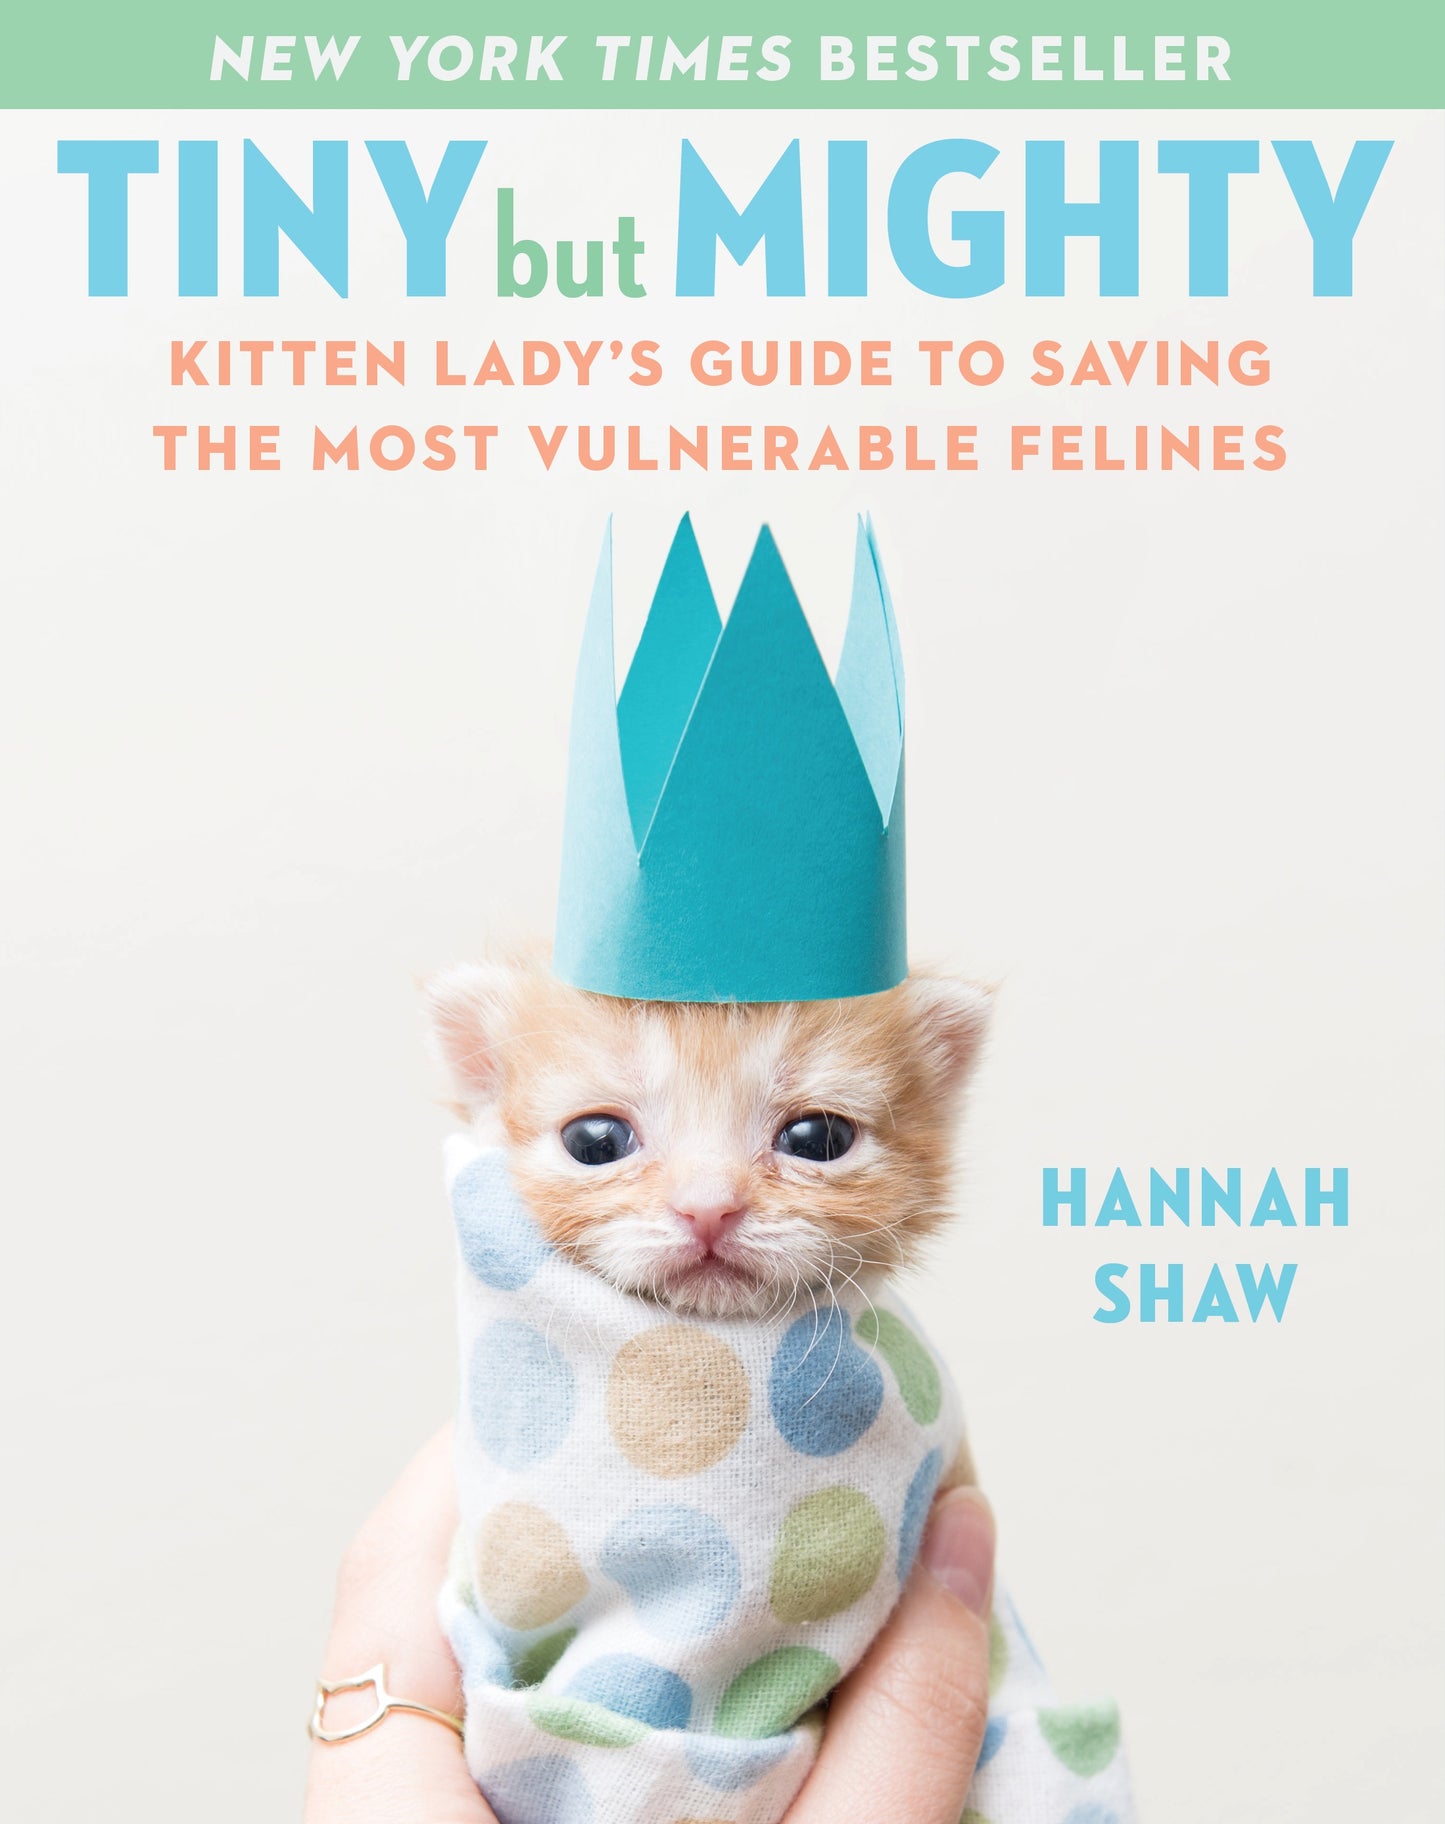 Tiny But Mighty: Kitten Lady's Guide To Saving The Most Vulnerable Felines by Hannah Shaw